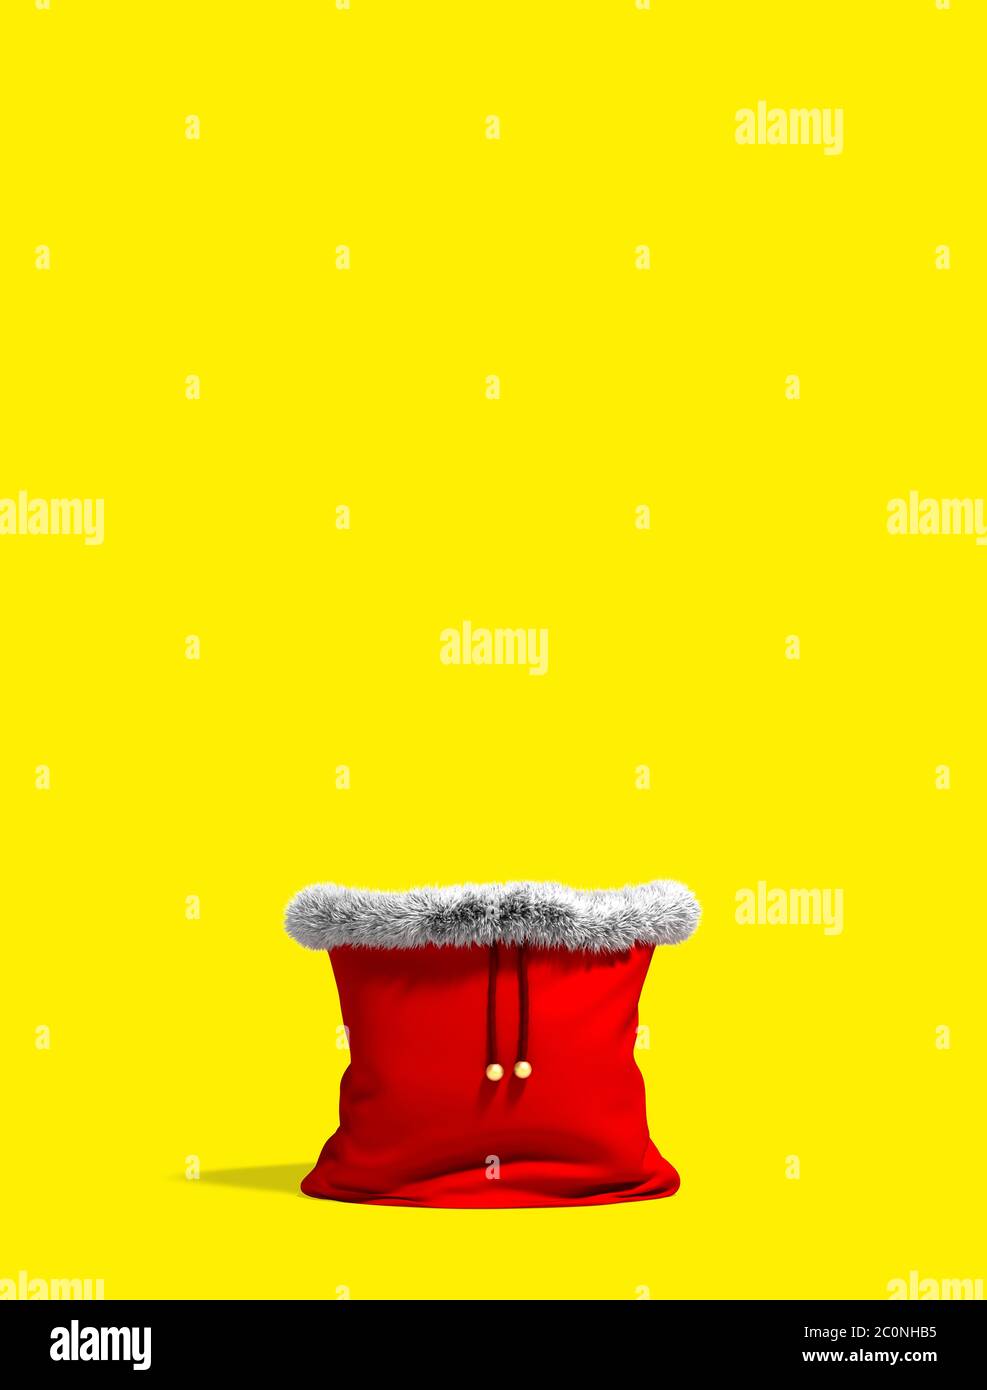 Christmas bag full of red gifts 3D rendering yellow background Stock Photo